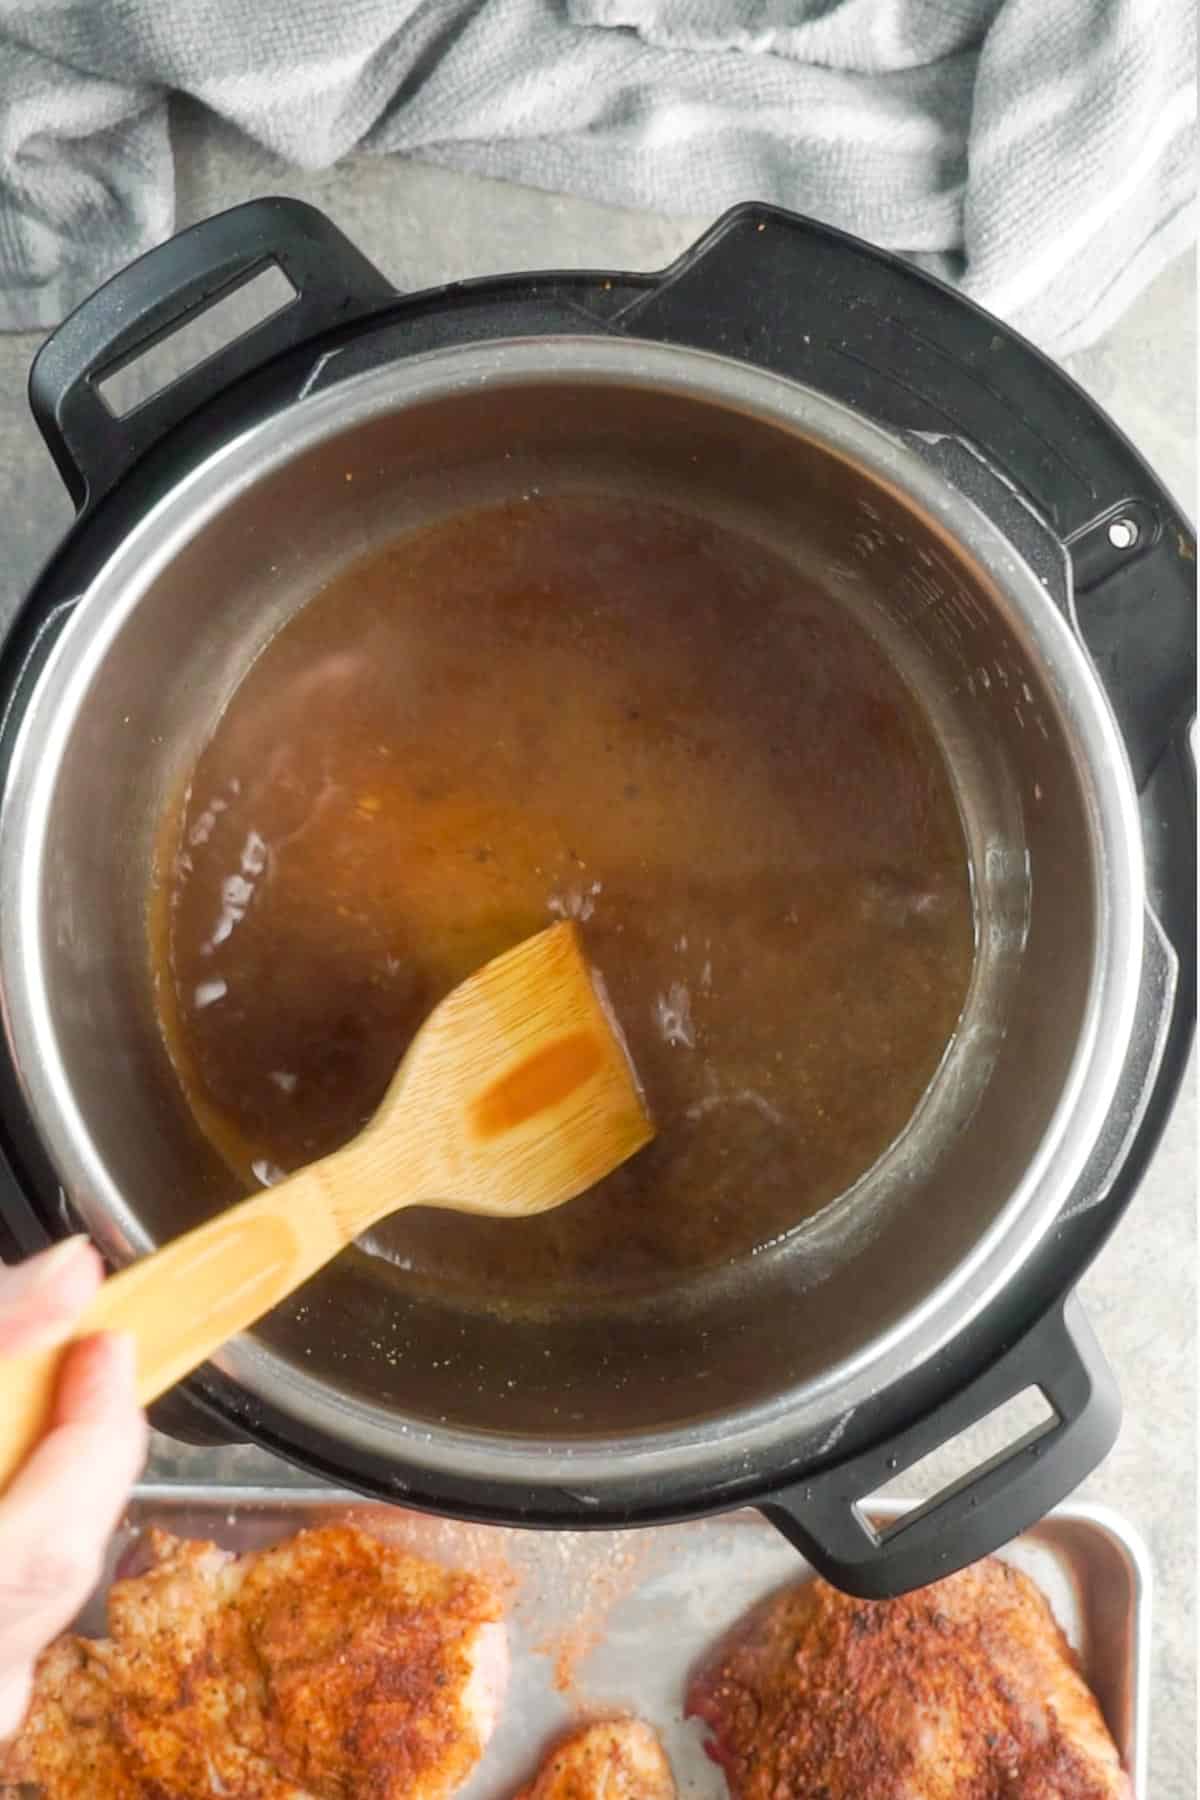 instant pot is being deglazed with a bamboo utensil